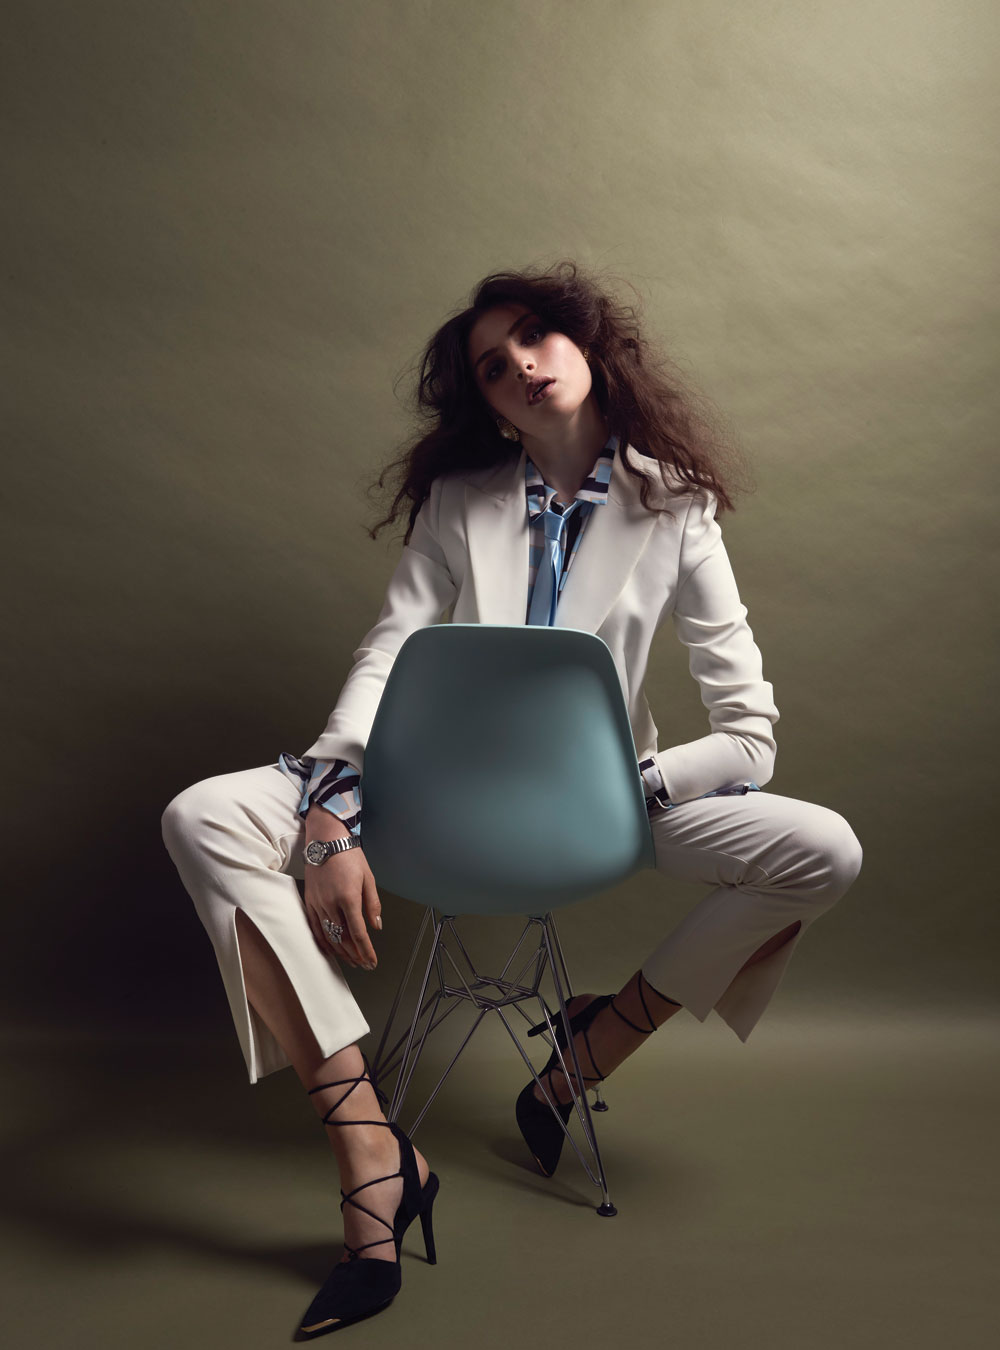 Camilla and Marc blazer, $990. Coop shirt, $179. Taylor pants, $427. Stylist’s own tie and earrings. Karen Walker ring, $24,279. Louis Vuitton watch, $7150. Senso heels, $289. Charles and Ray Eames chair, $450, from Mr. Bigglesworthy.